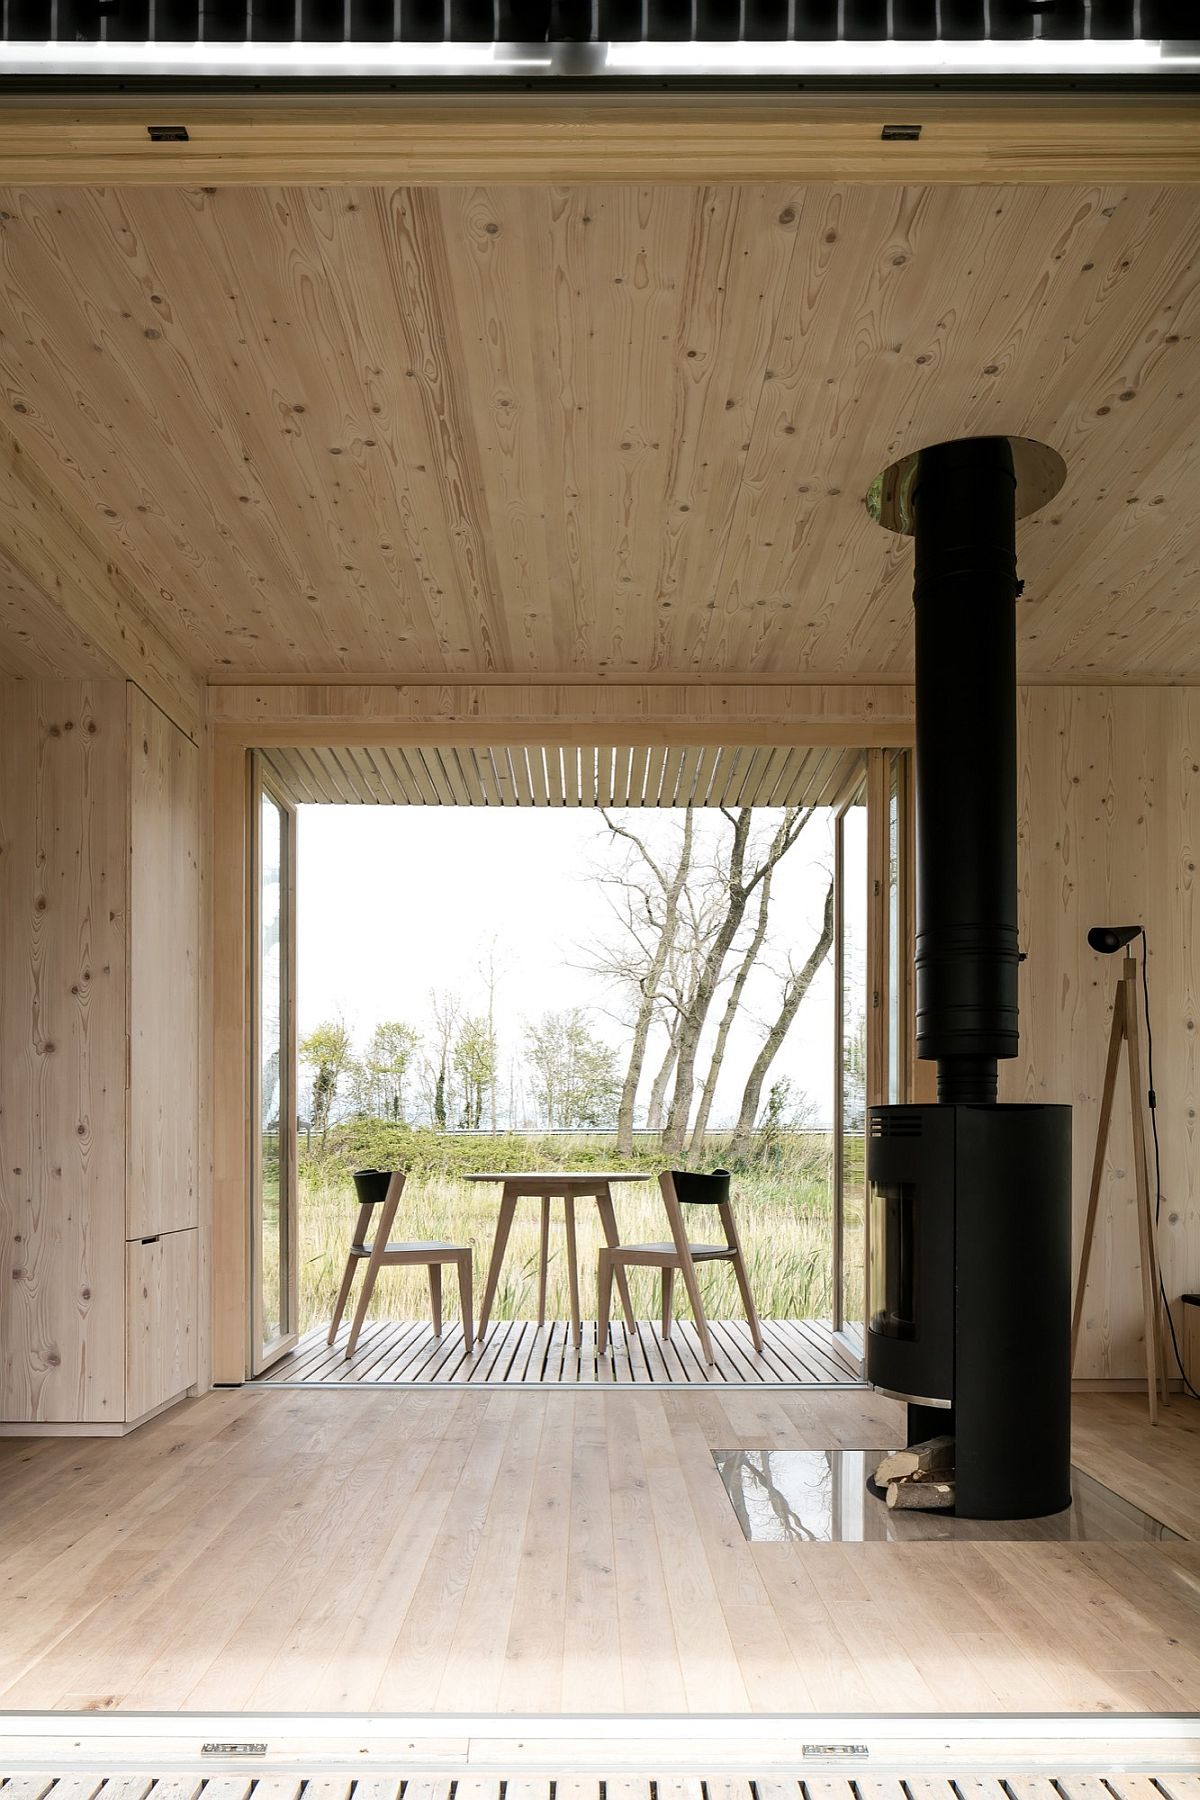 Cabin interior has a lovely indoor-outdoor interplay along with a minimal design